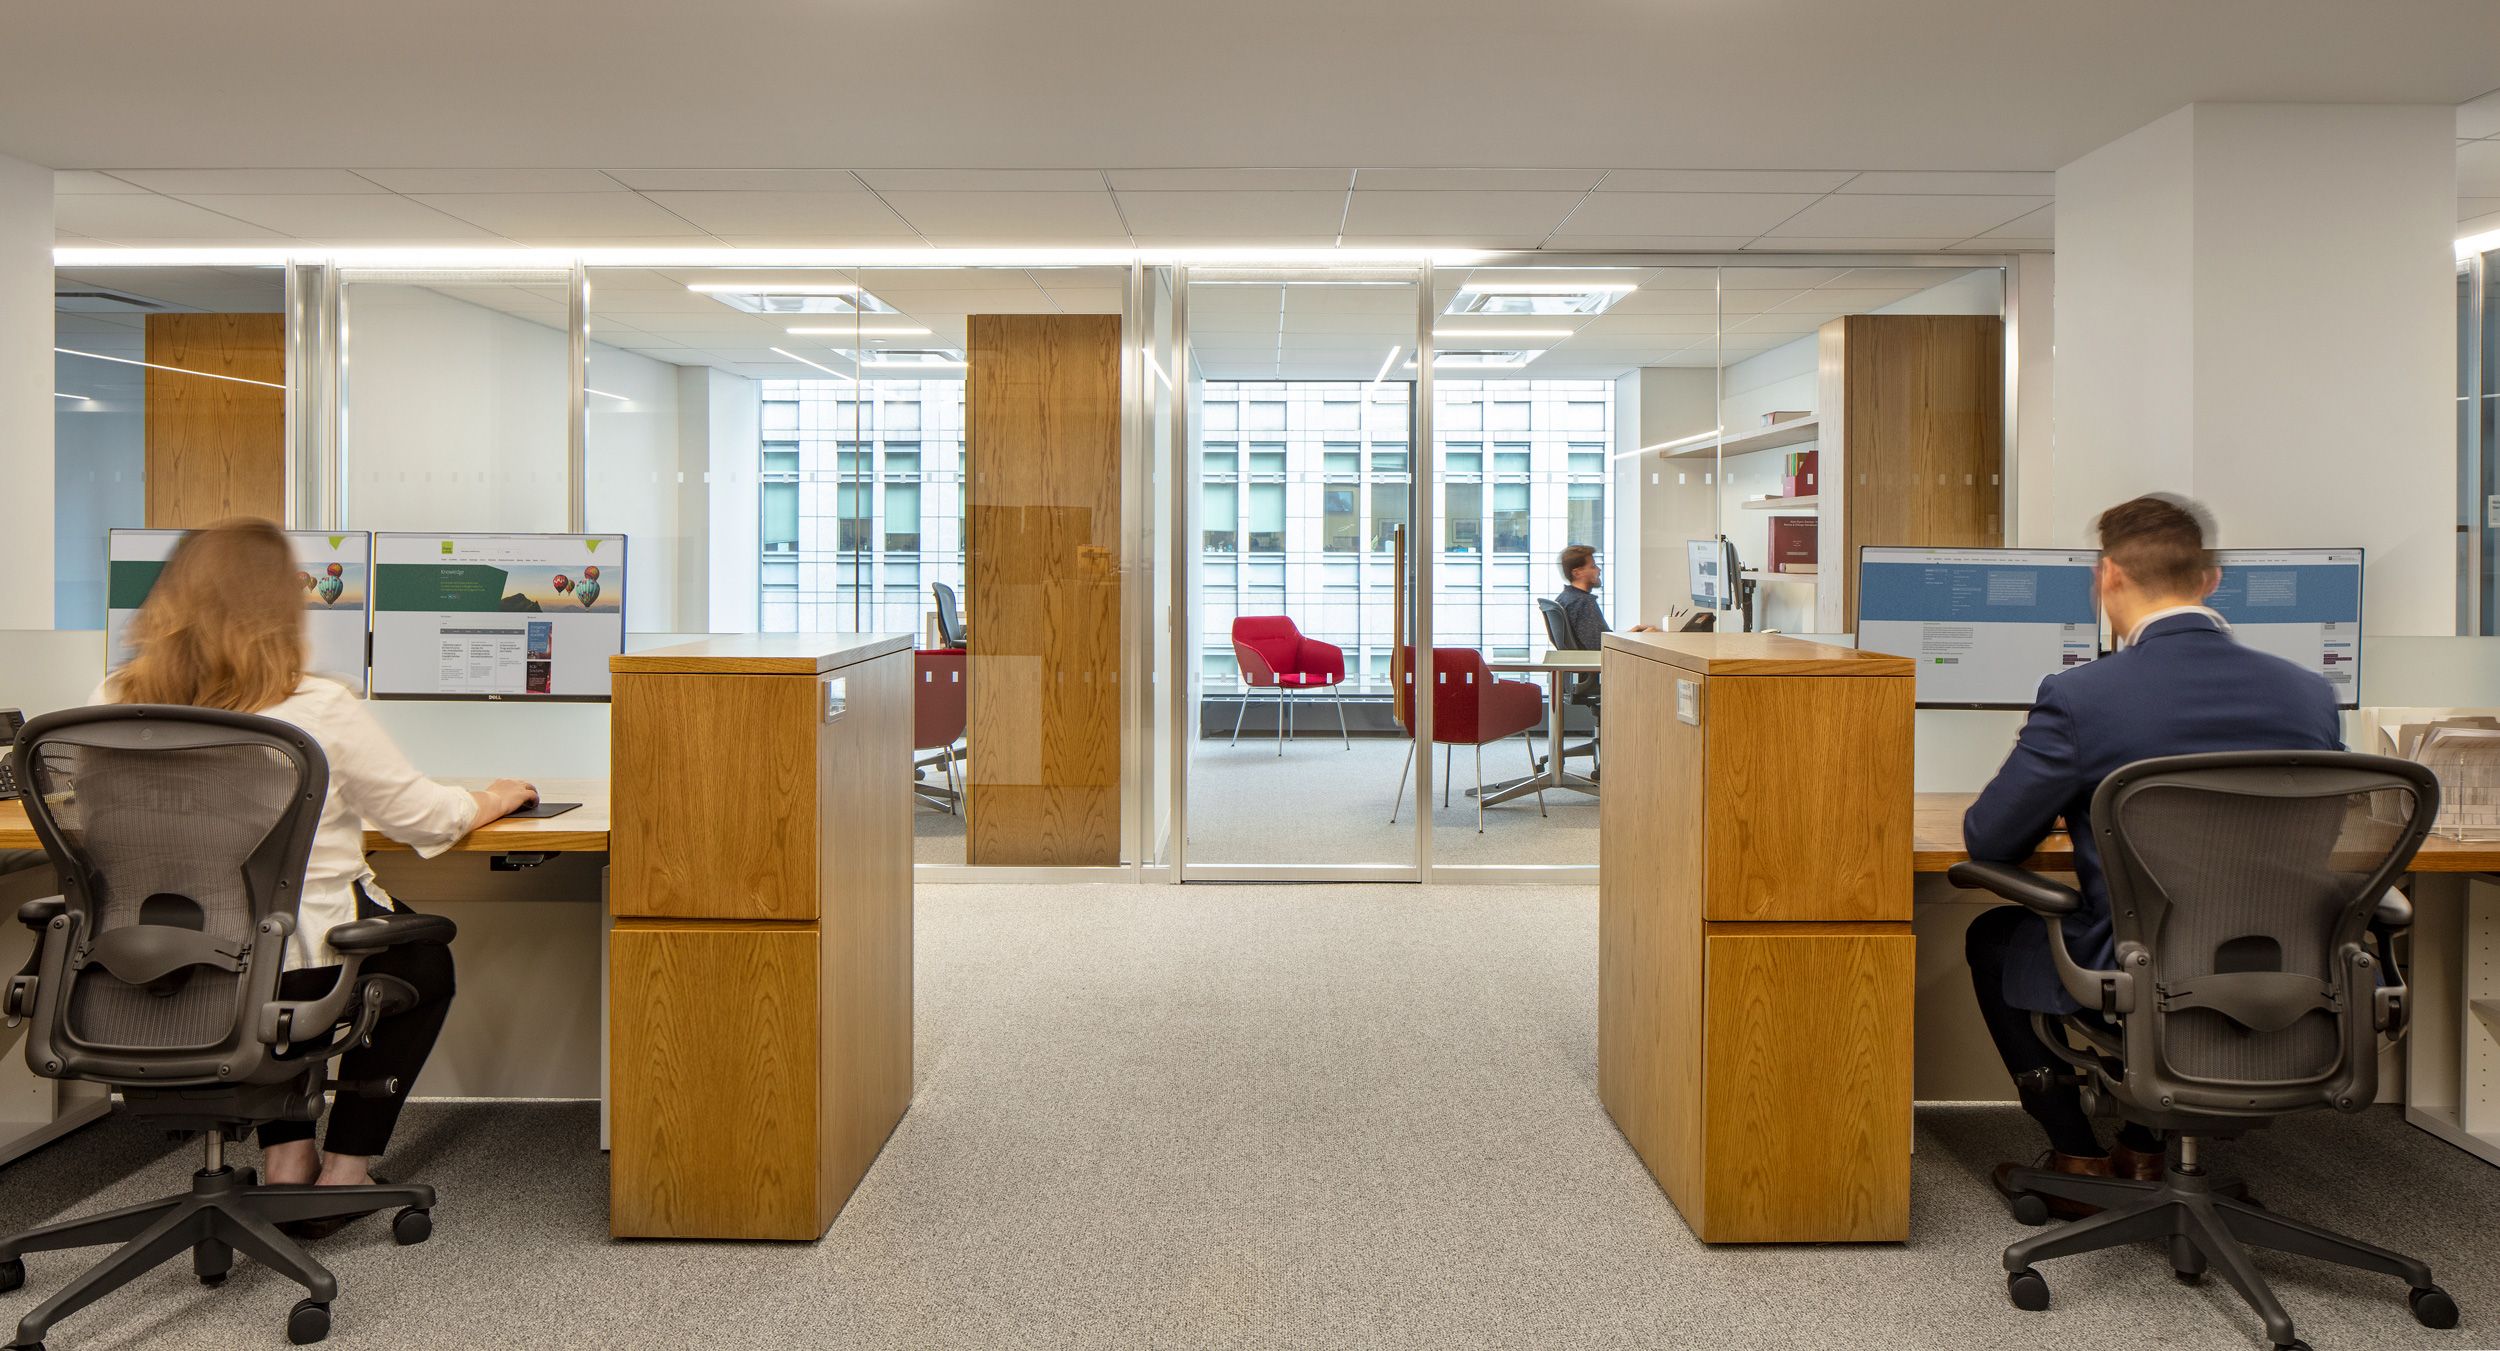 NEW MILLENNIA open offices in Flat Cut White Oak with custom stain finish.